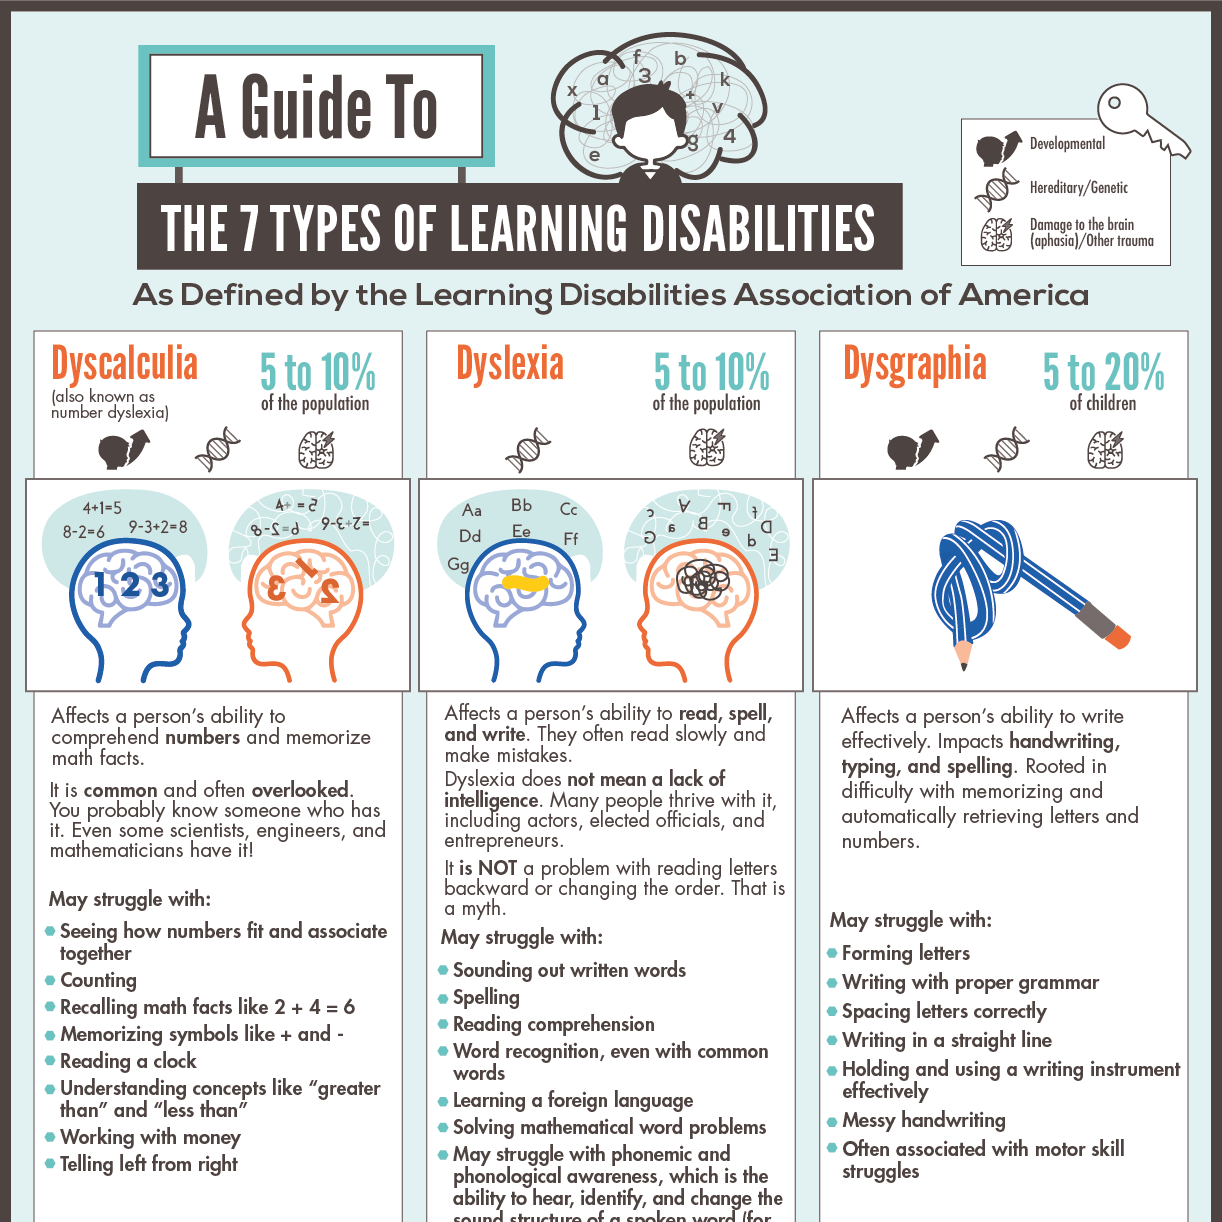 A Guide To The 7 Types Of Learning Disabilities